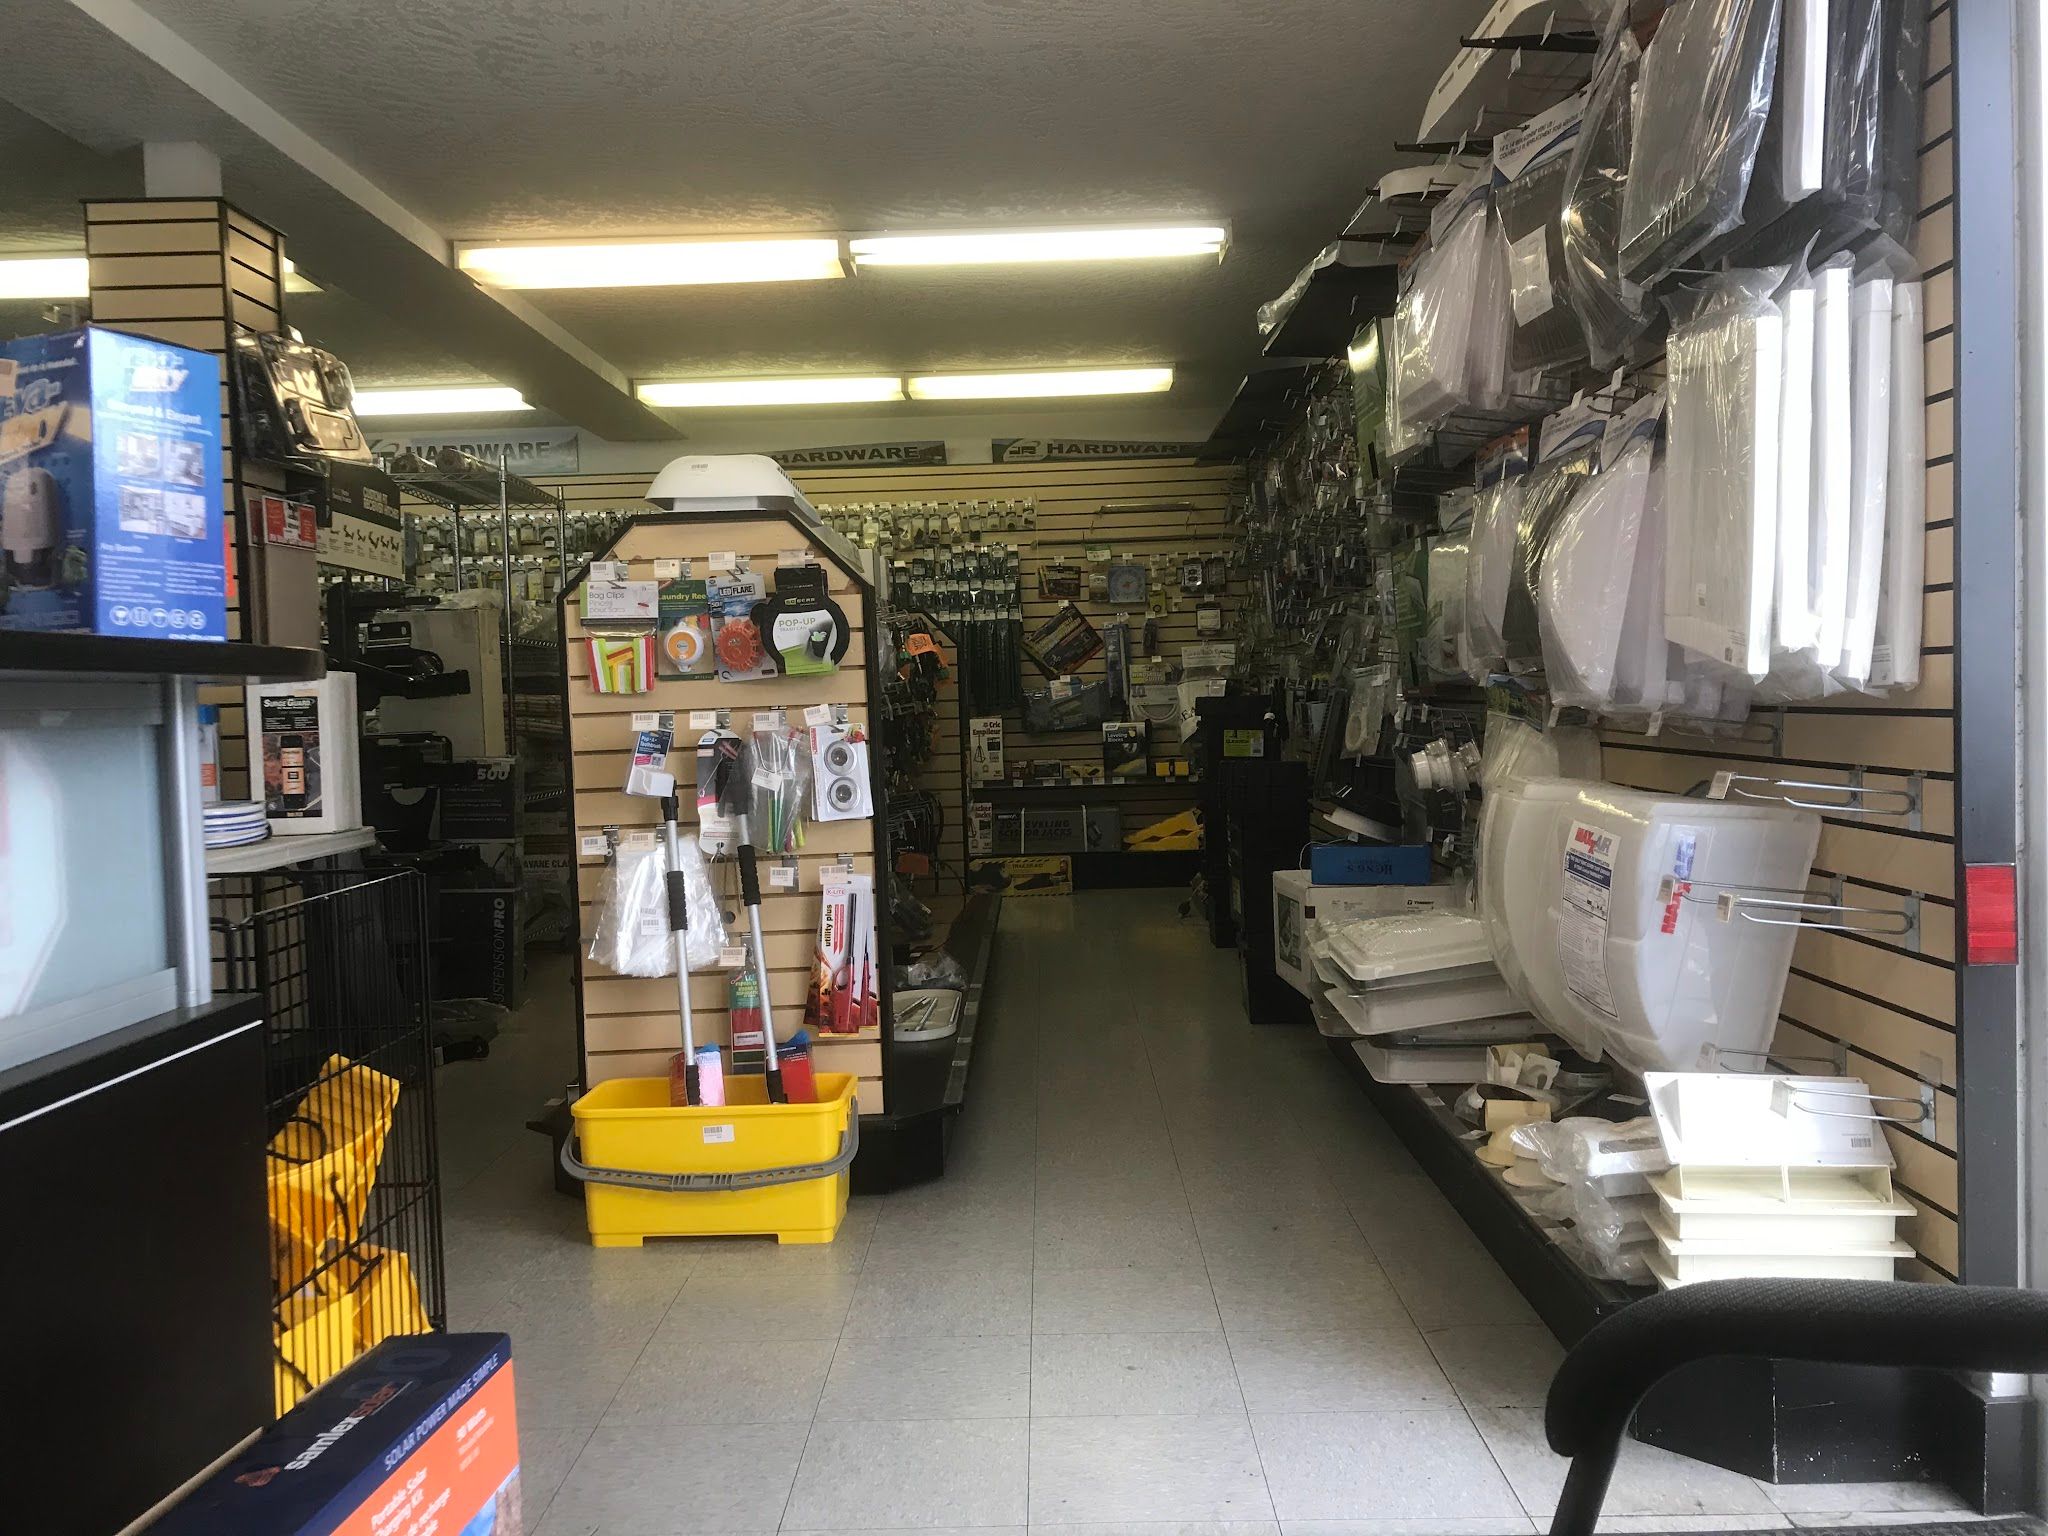 Services & Products Tom’s RV Service and Supplies Ltd in Victoria BC